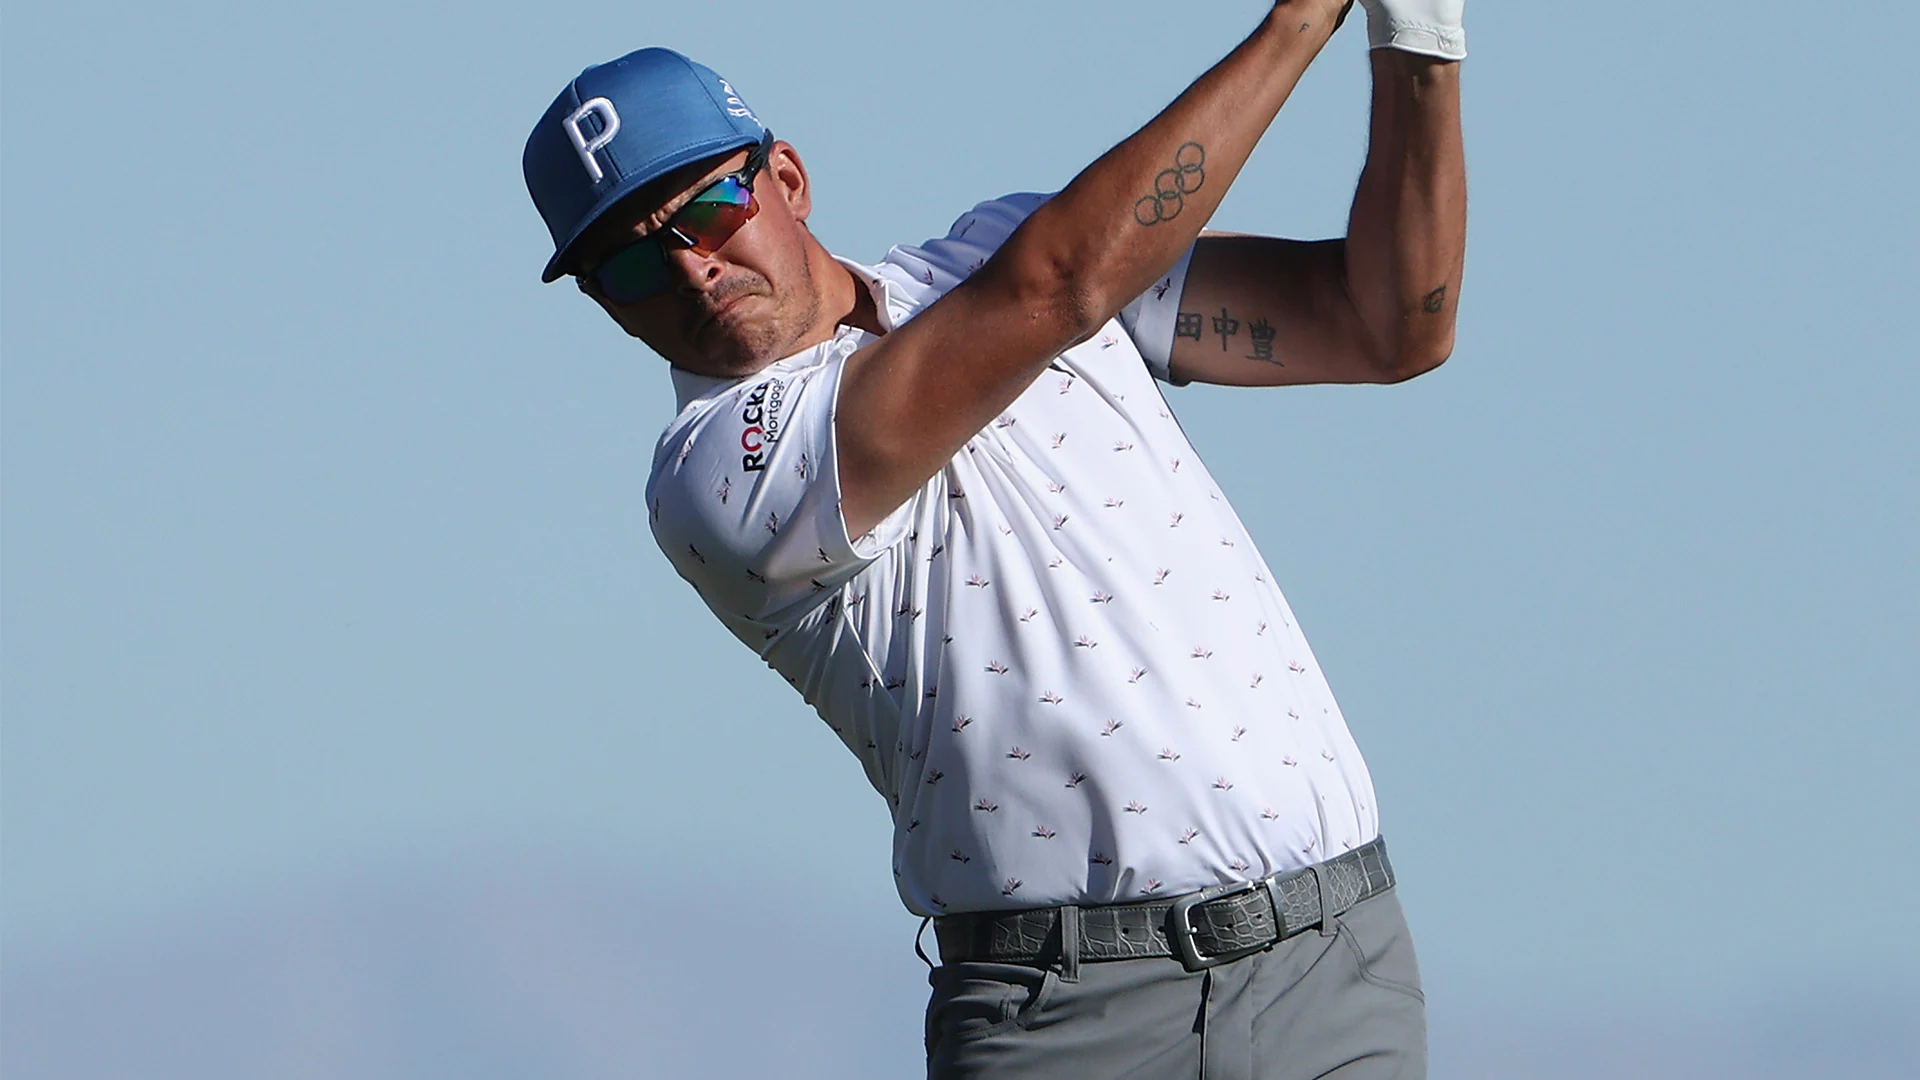 Rickie Fowler in contention at CJ Cup after visit with Butch Harmon